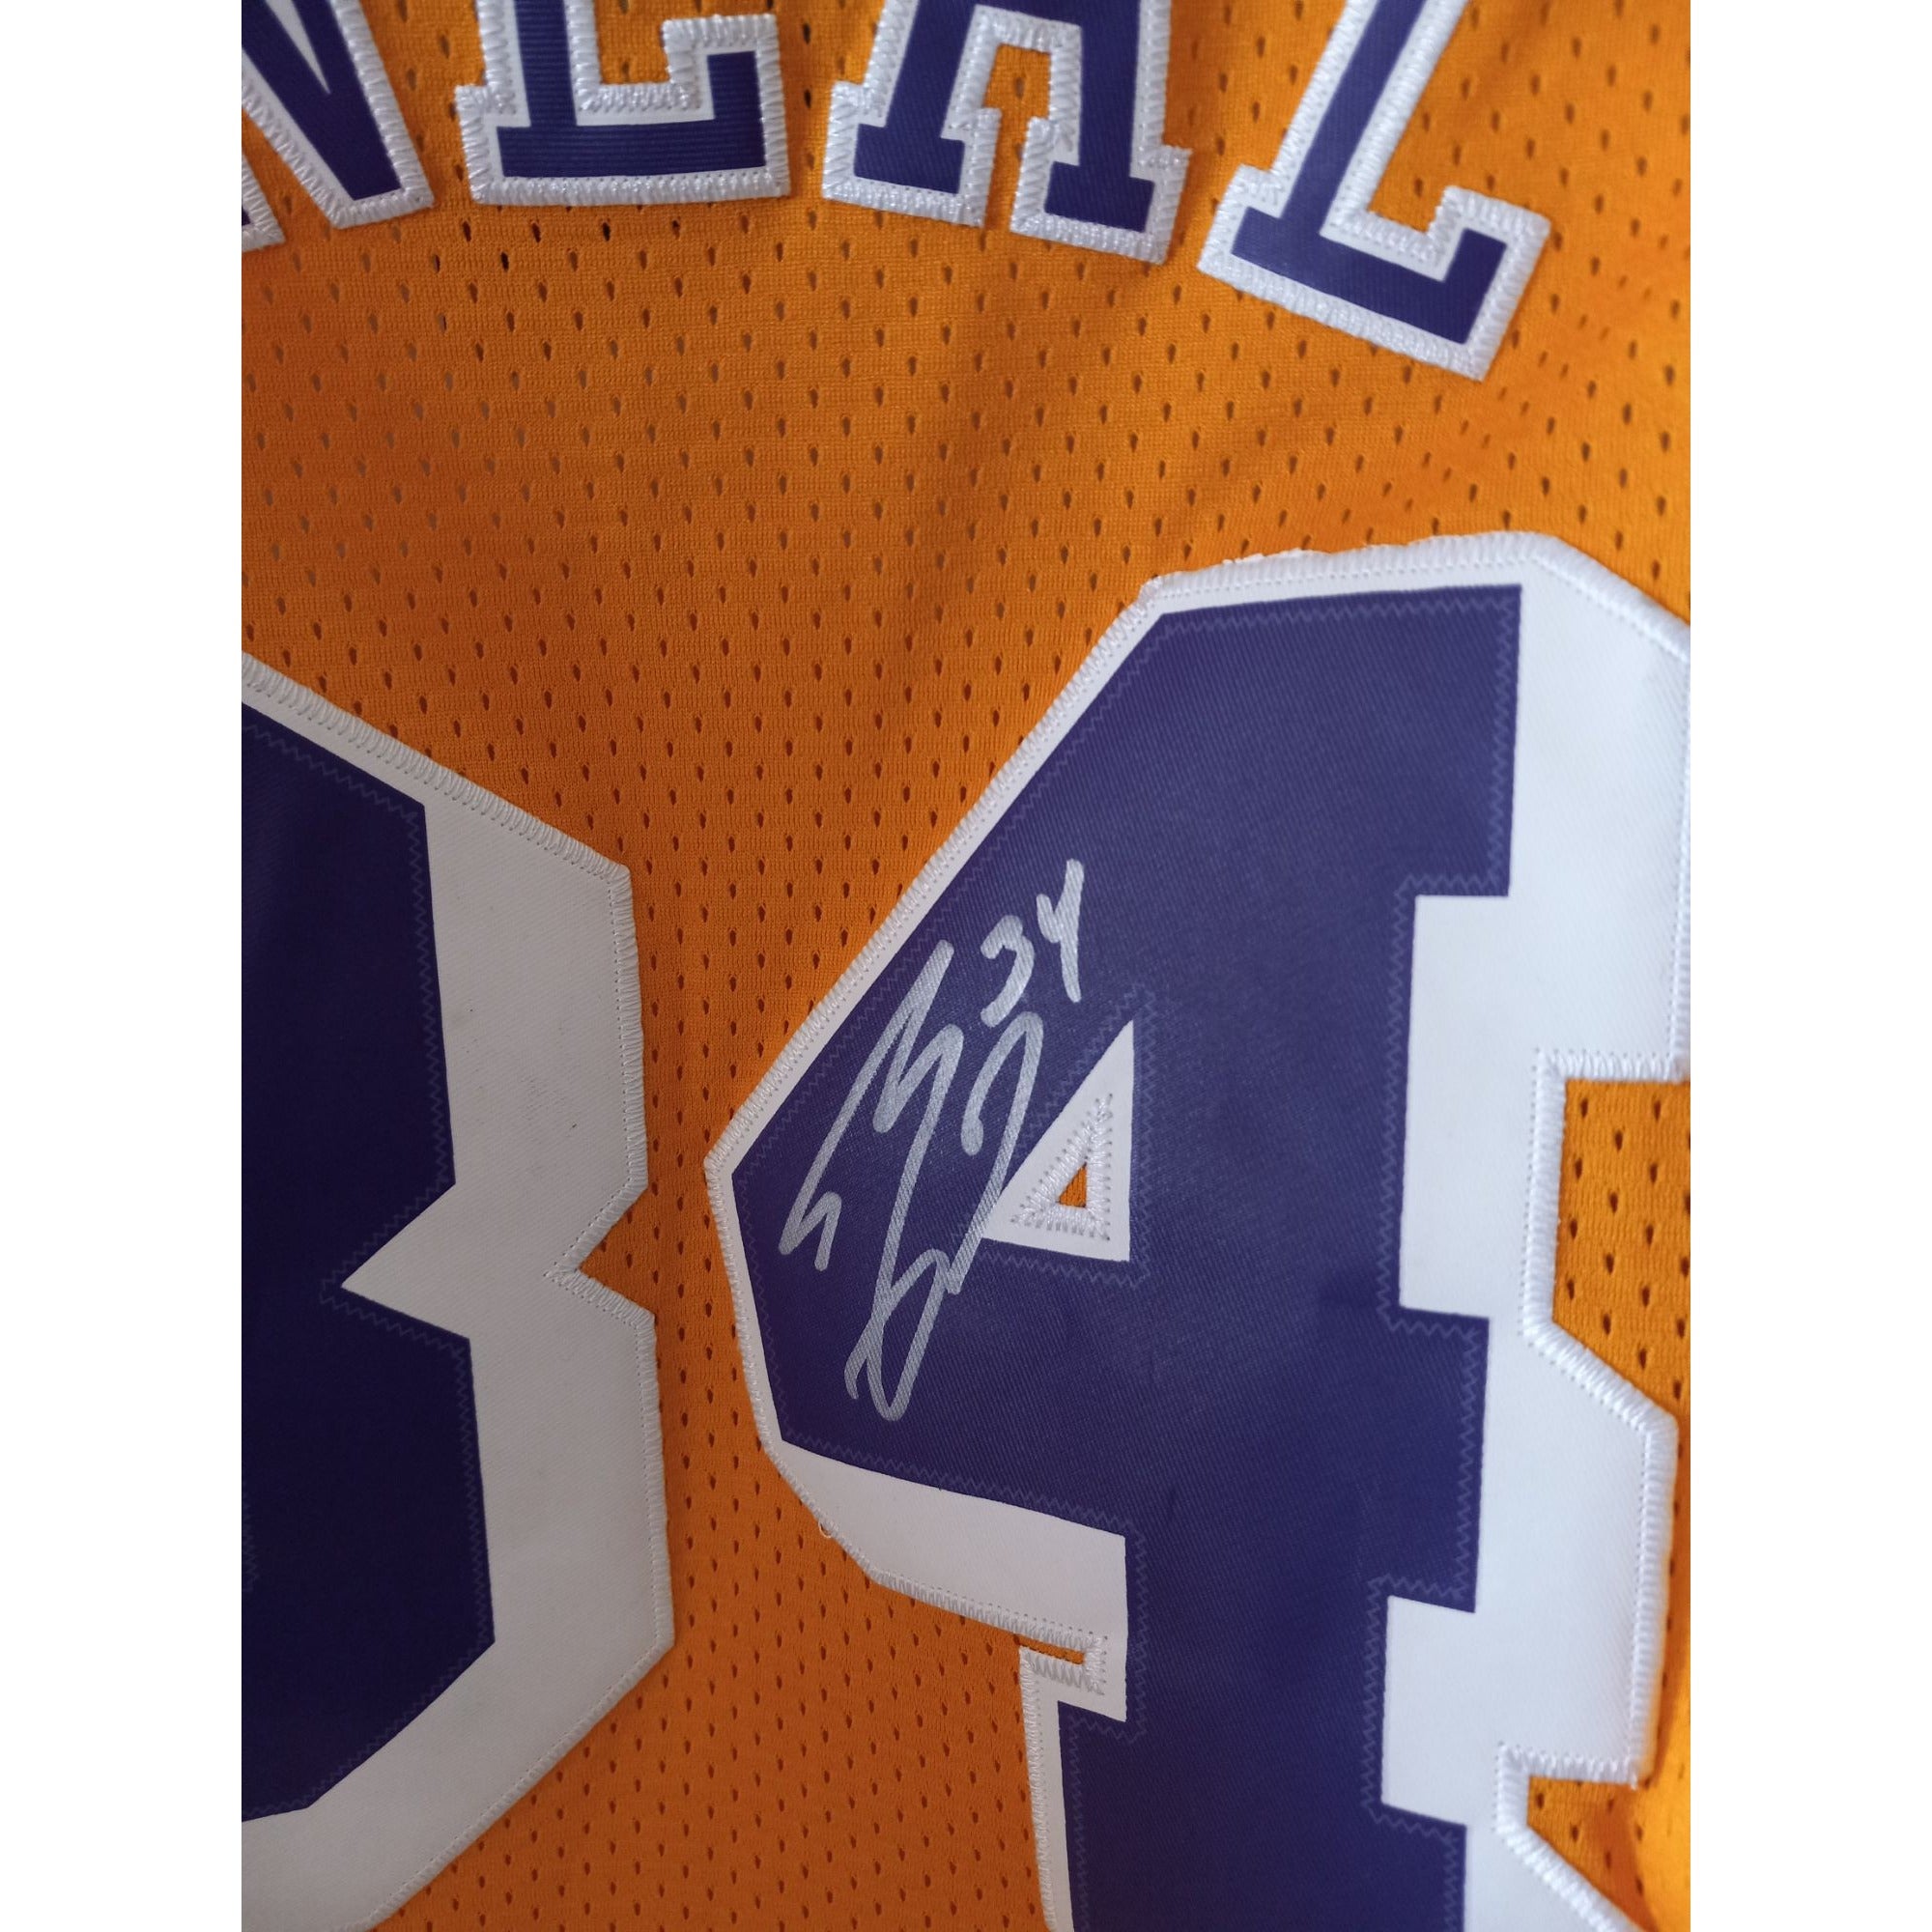 Shaquille O'Neal Los Angeles Lakers signed jersey with proof